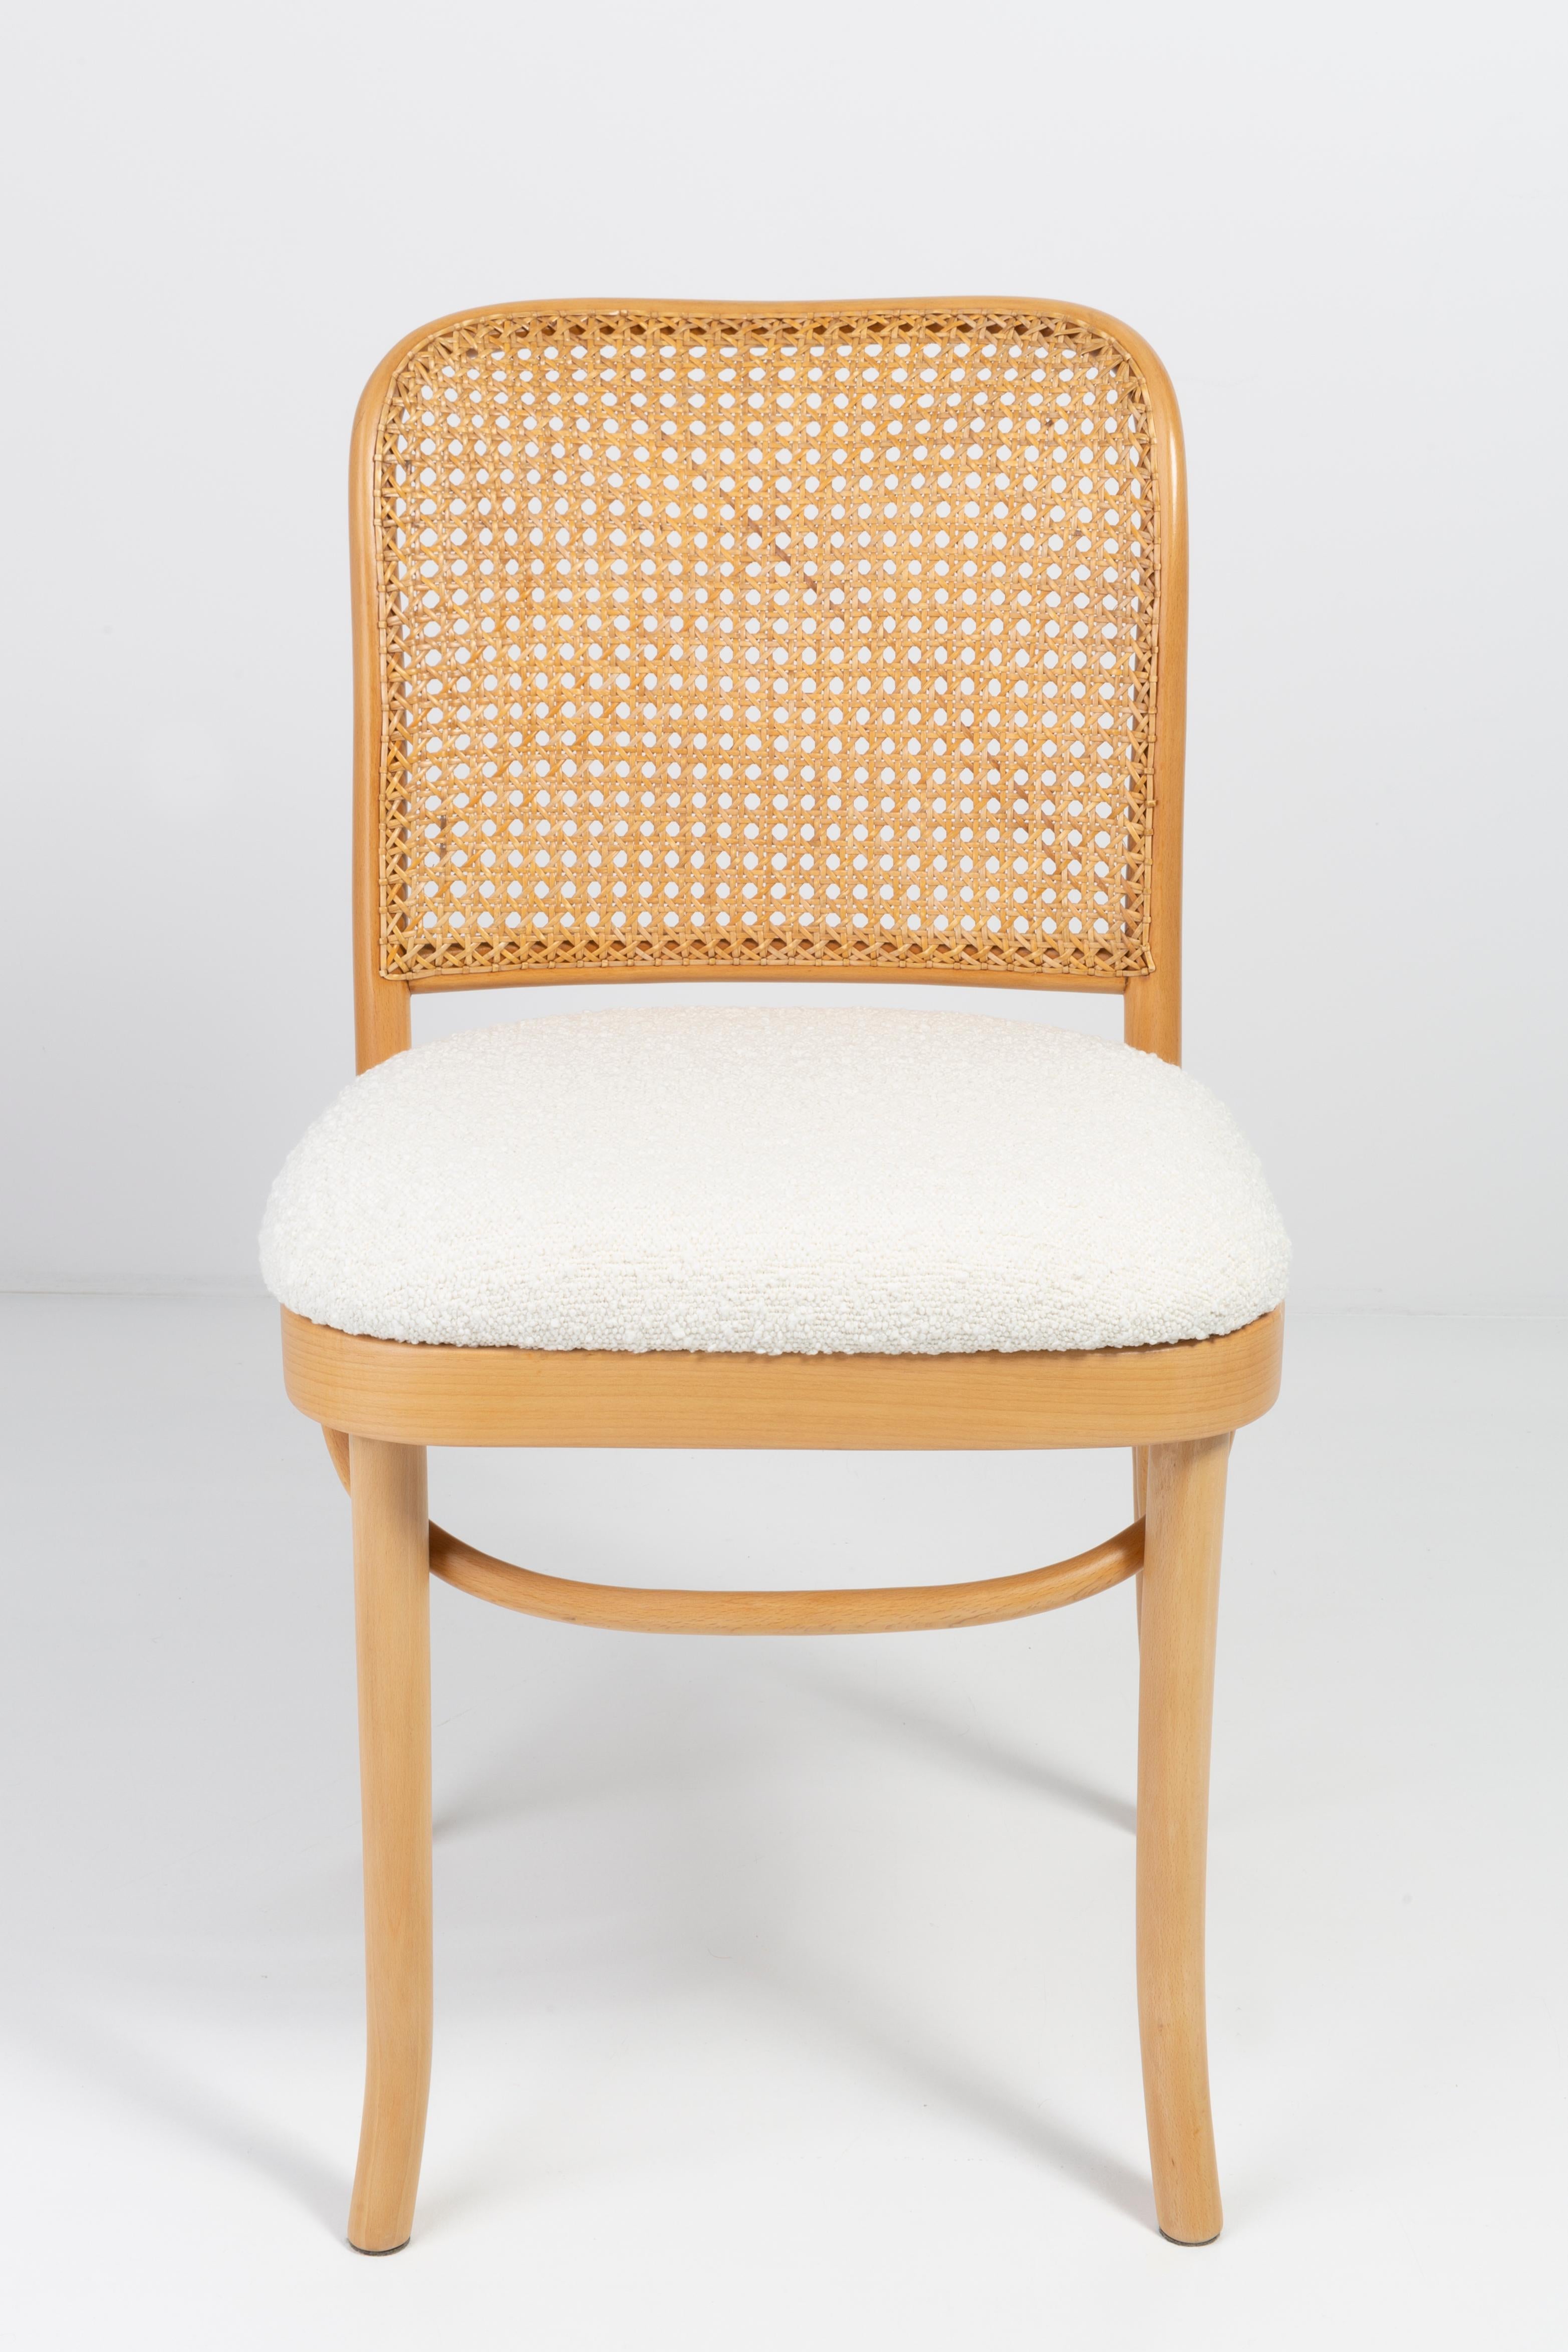 Set of Six White Boucle Thonet Wood Rattan Chairs, 1960s For Sale 9